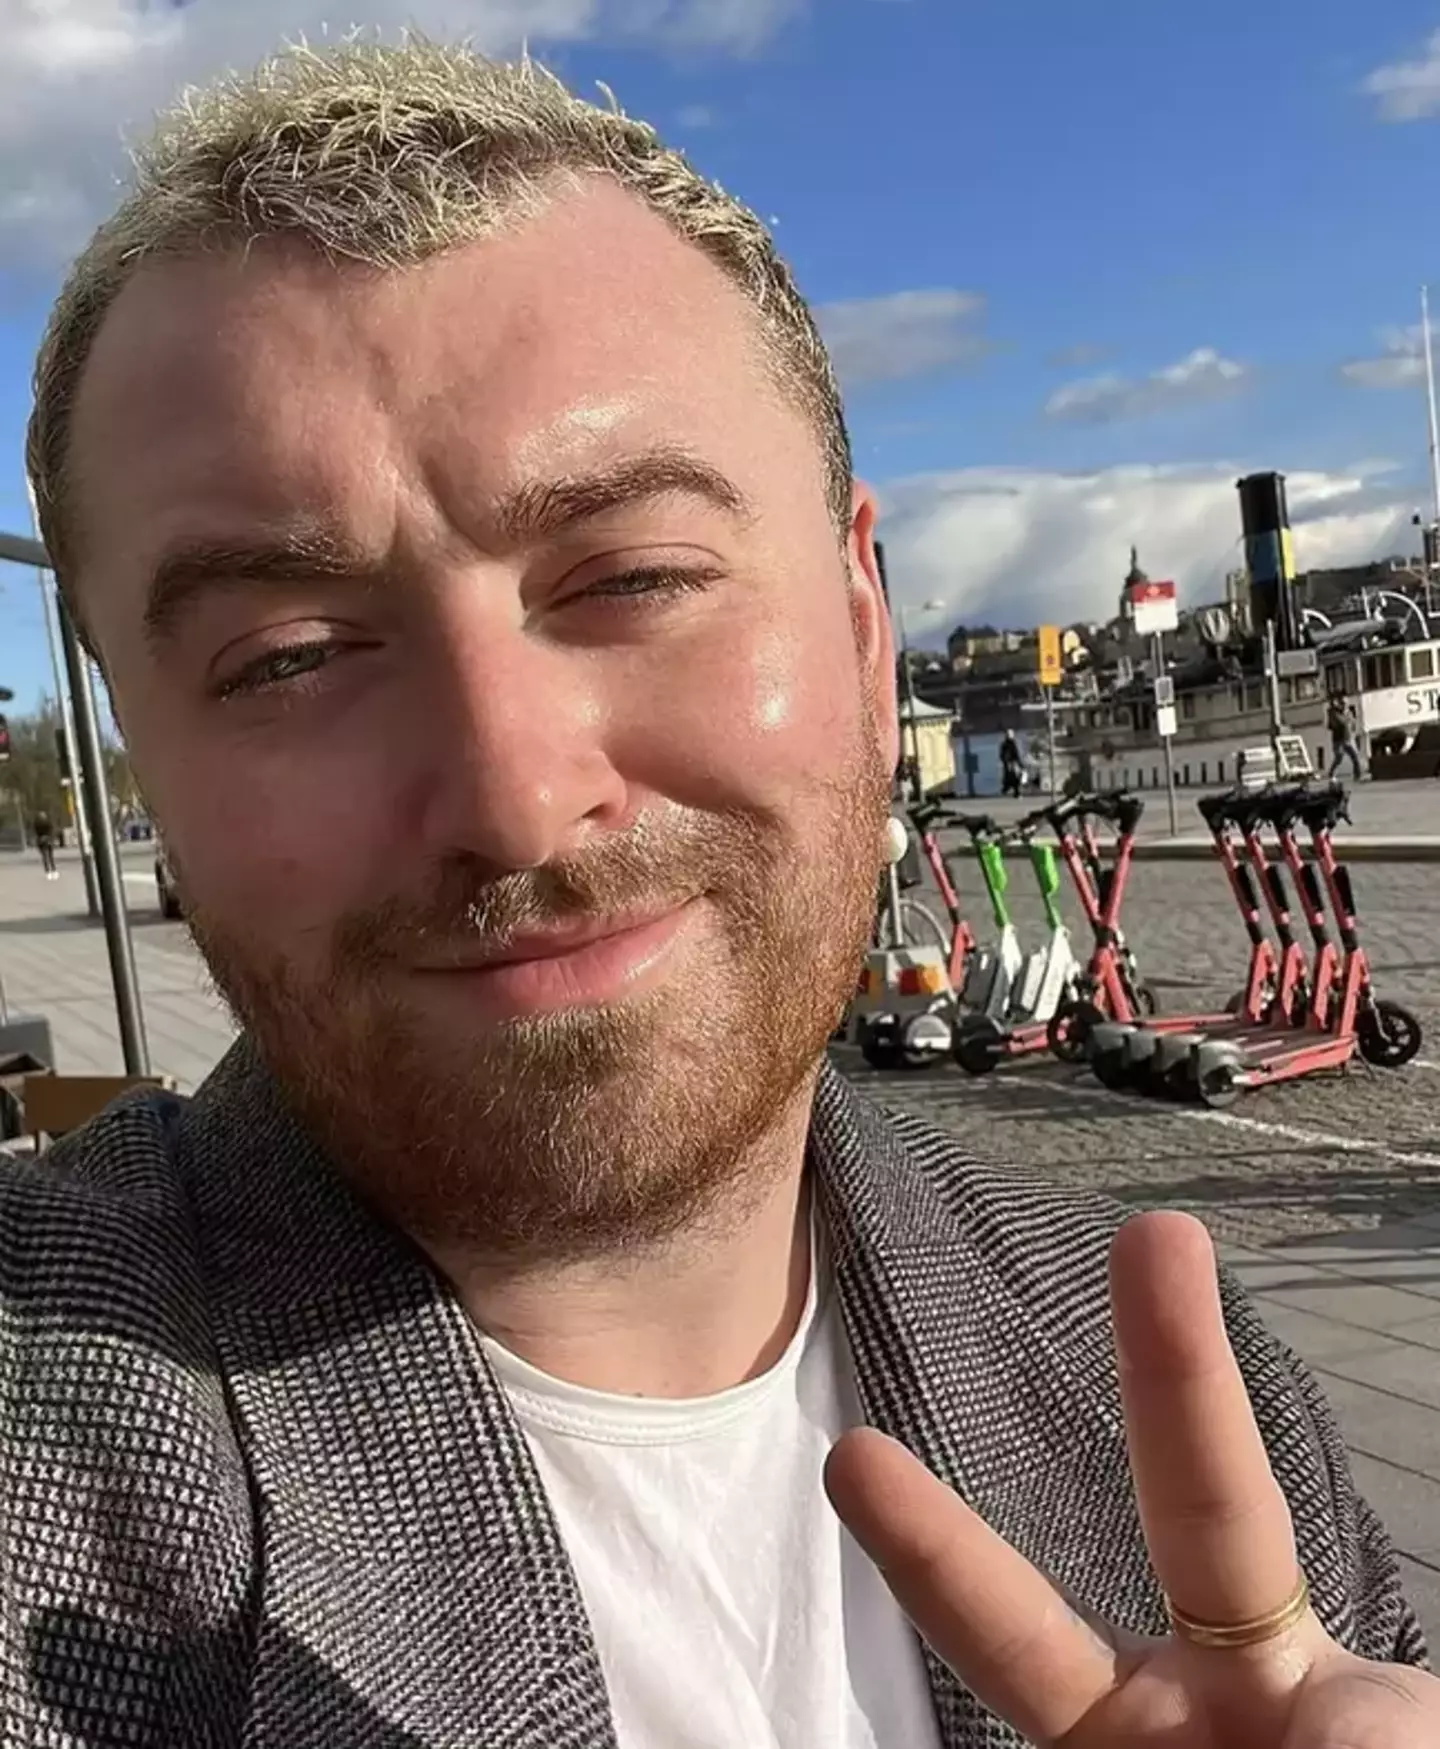 Sam Smith has collaborated with a big star on a new song.